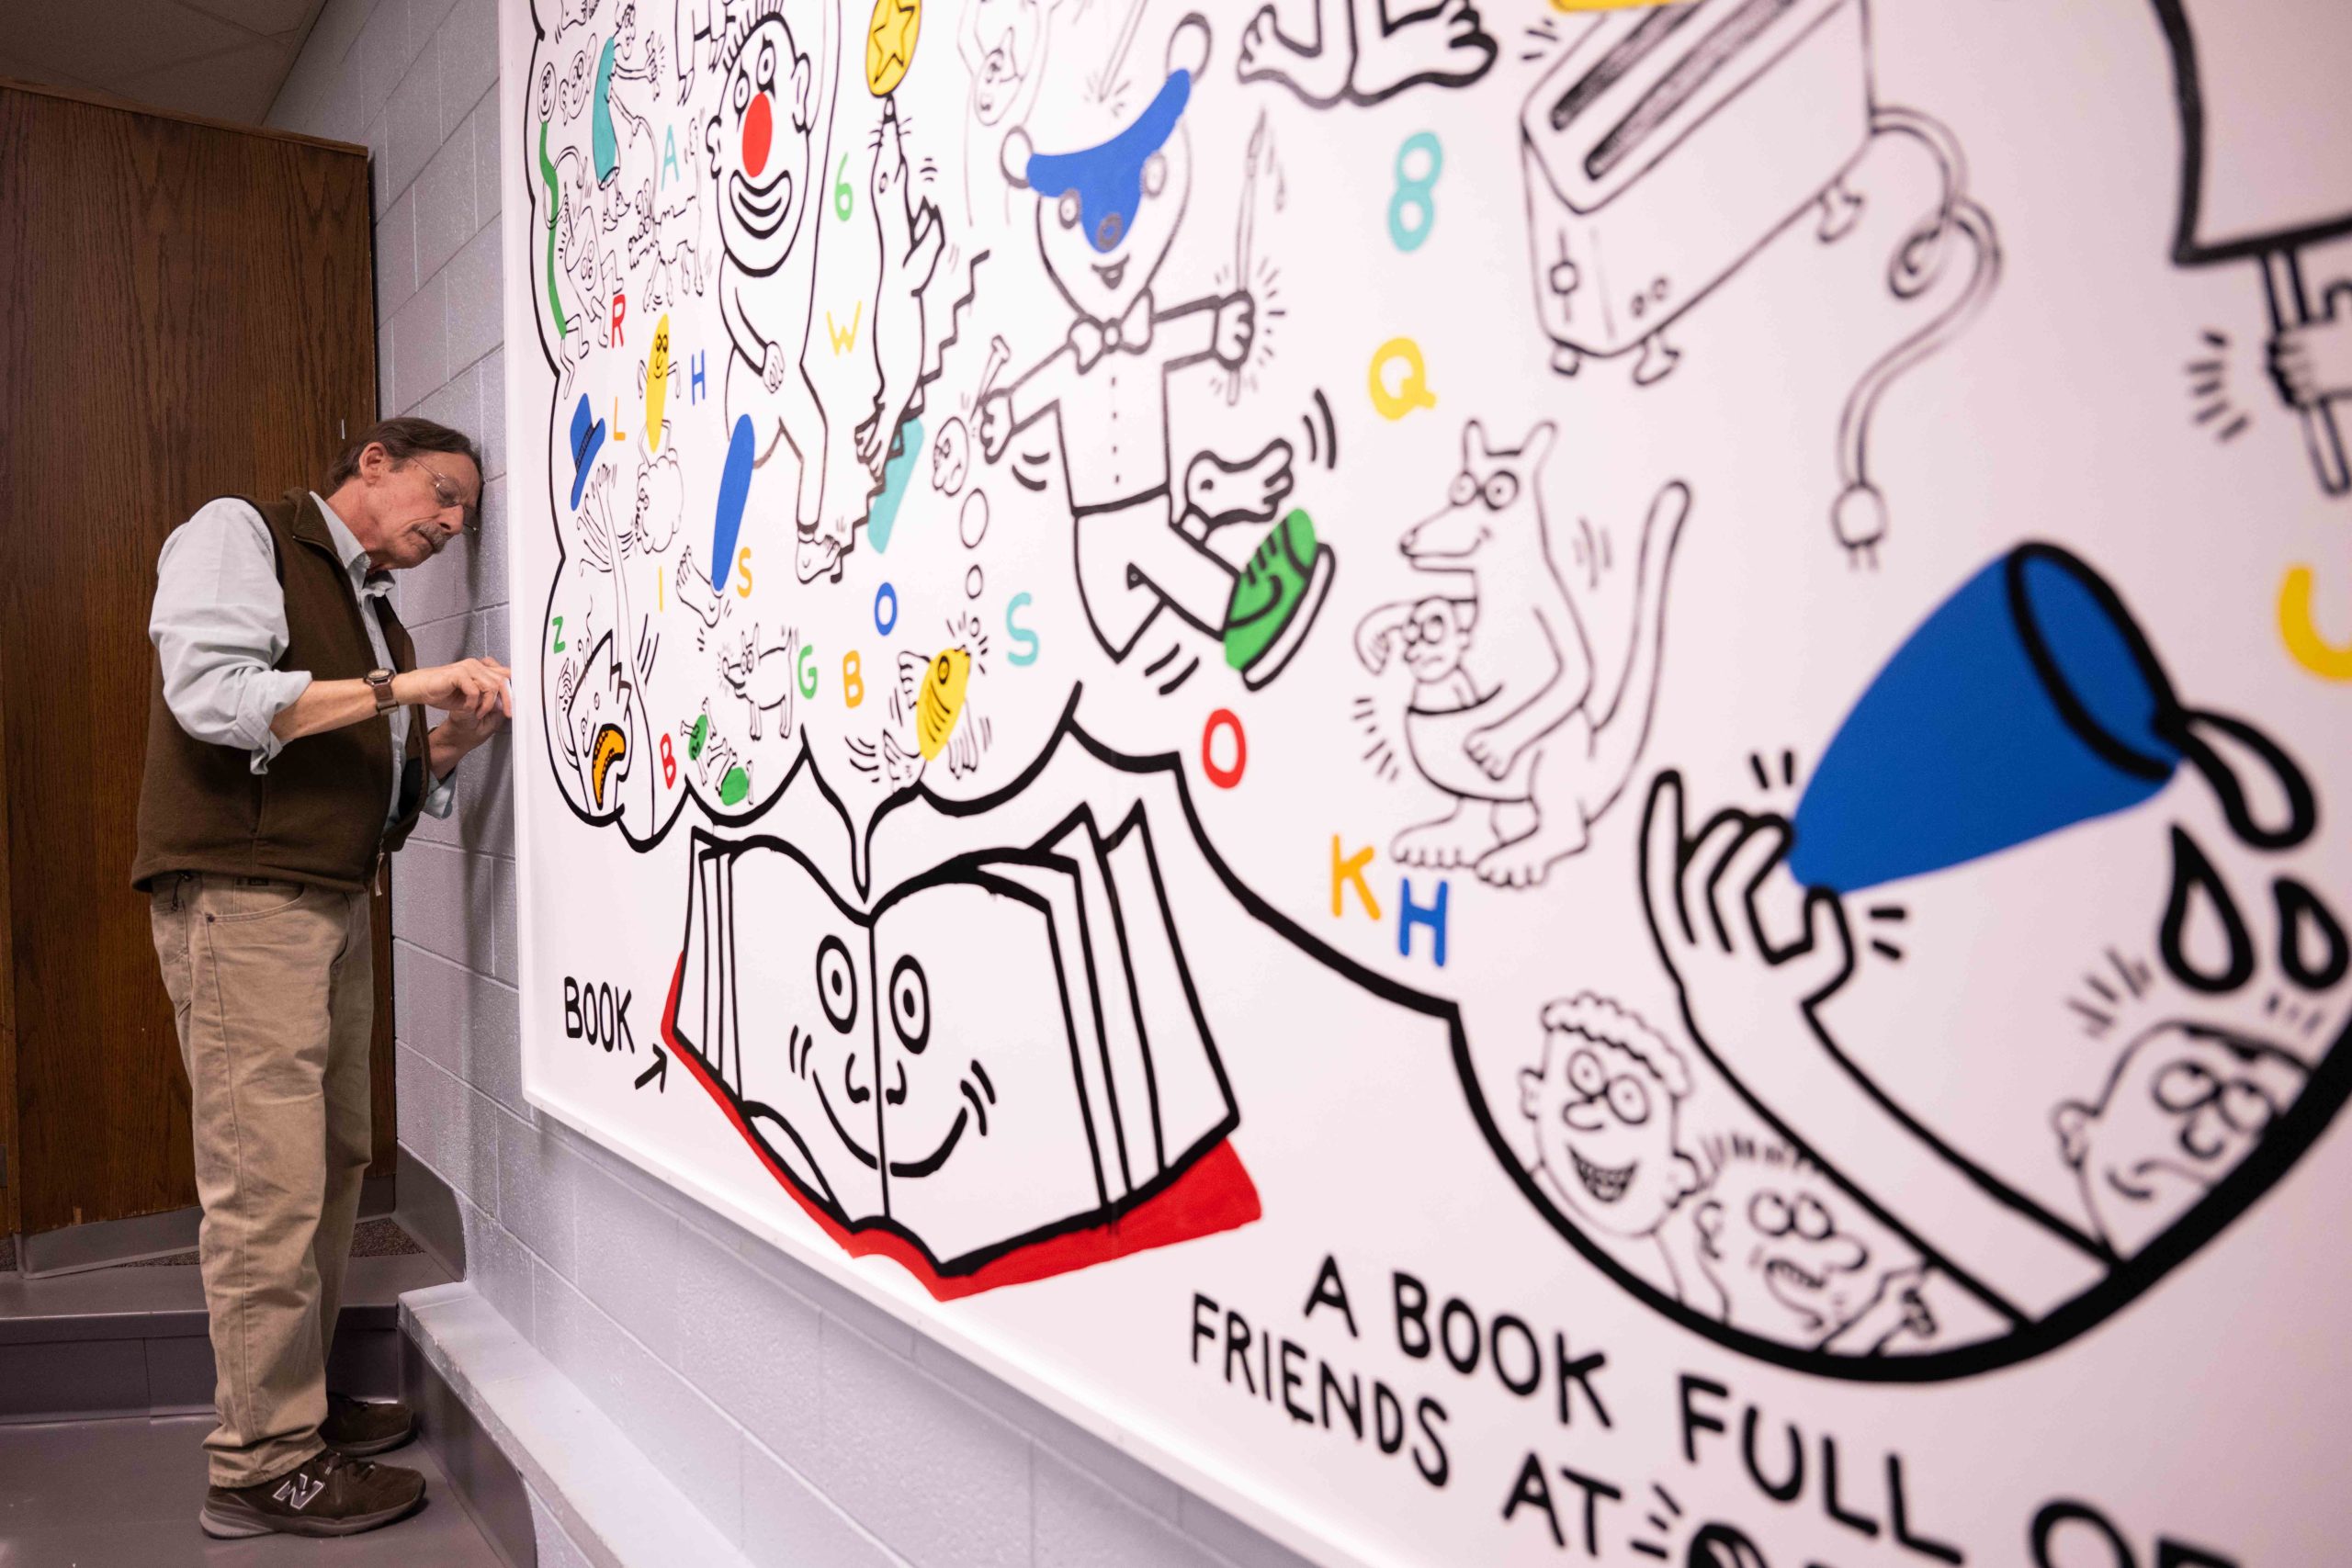 A person is attaching a large printed and framed picture onto a wall. The pictures contains colorful, drawn figures on white background.